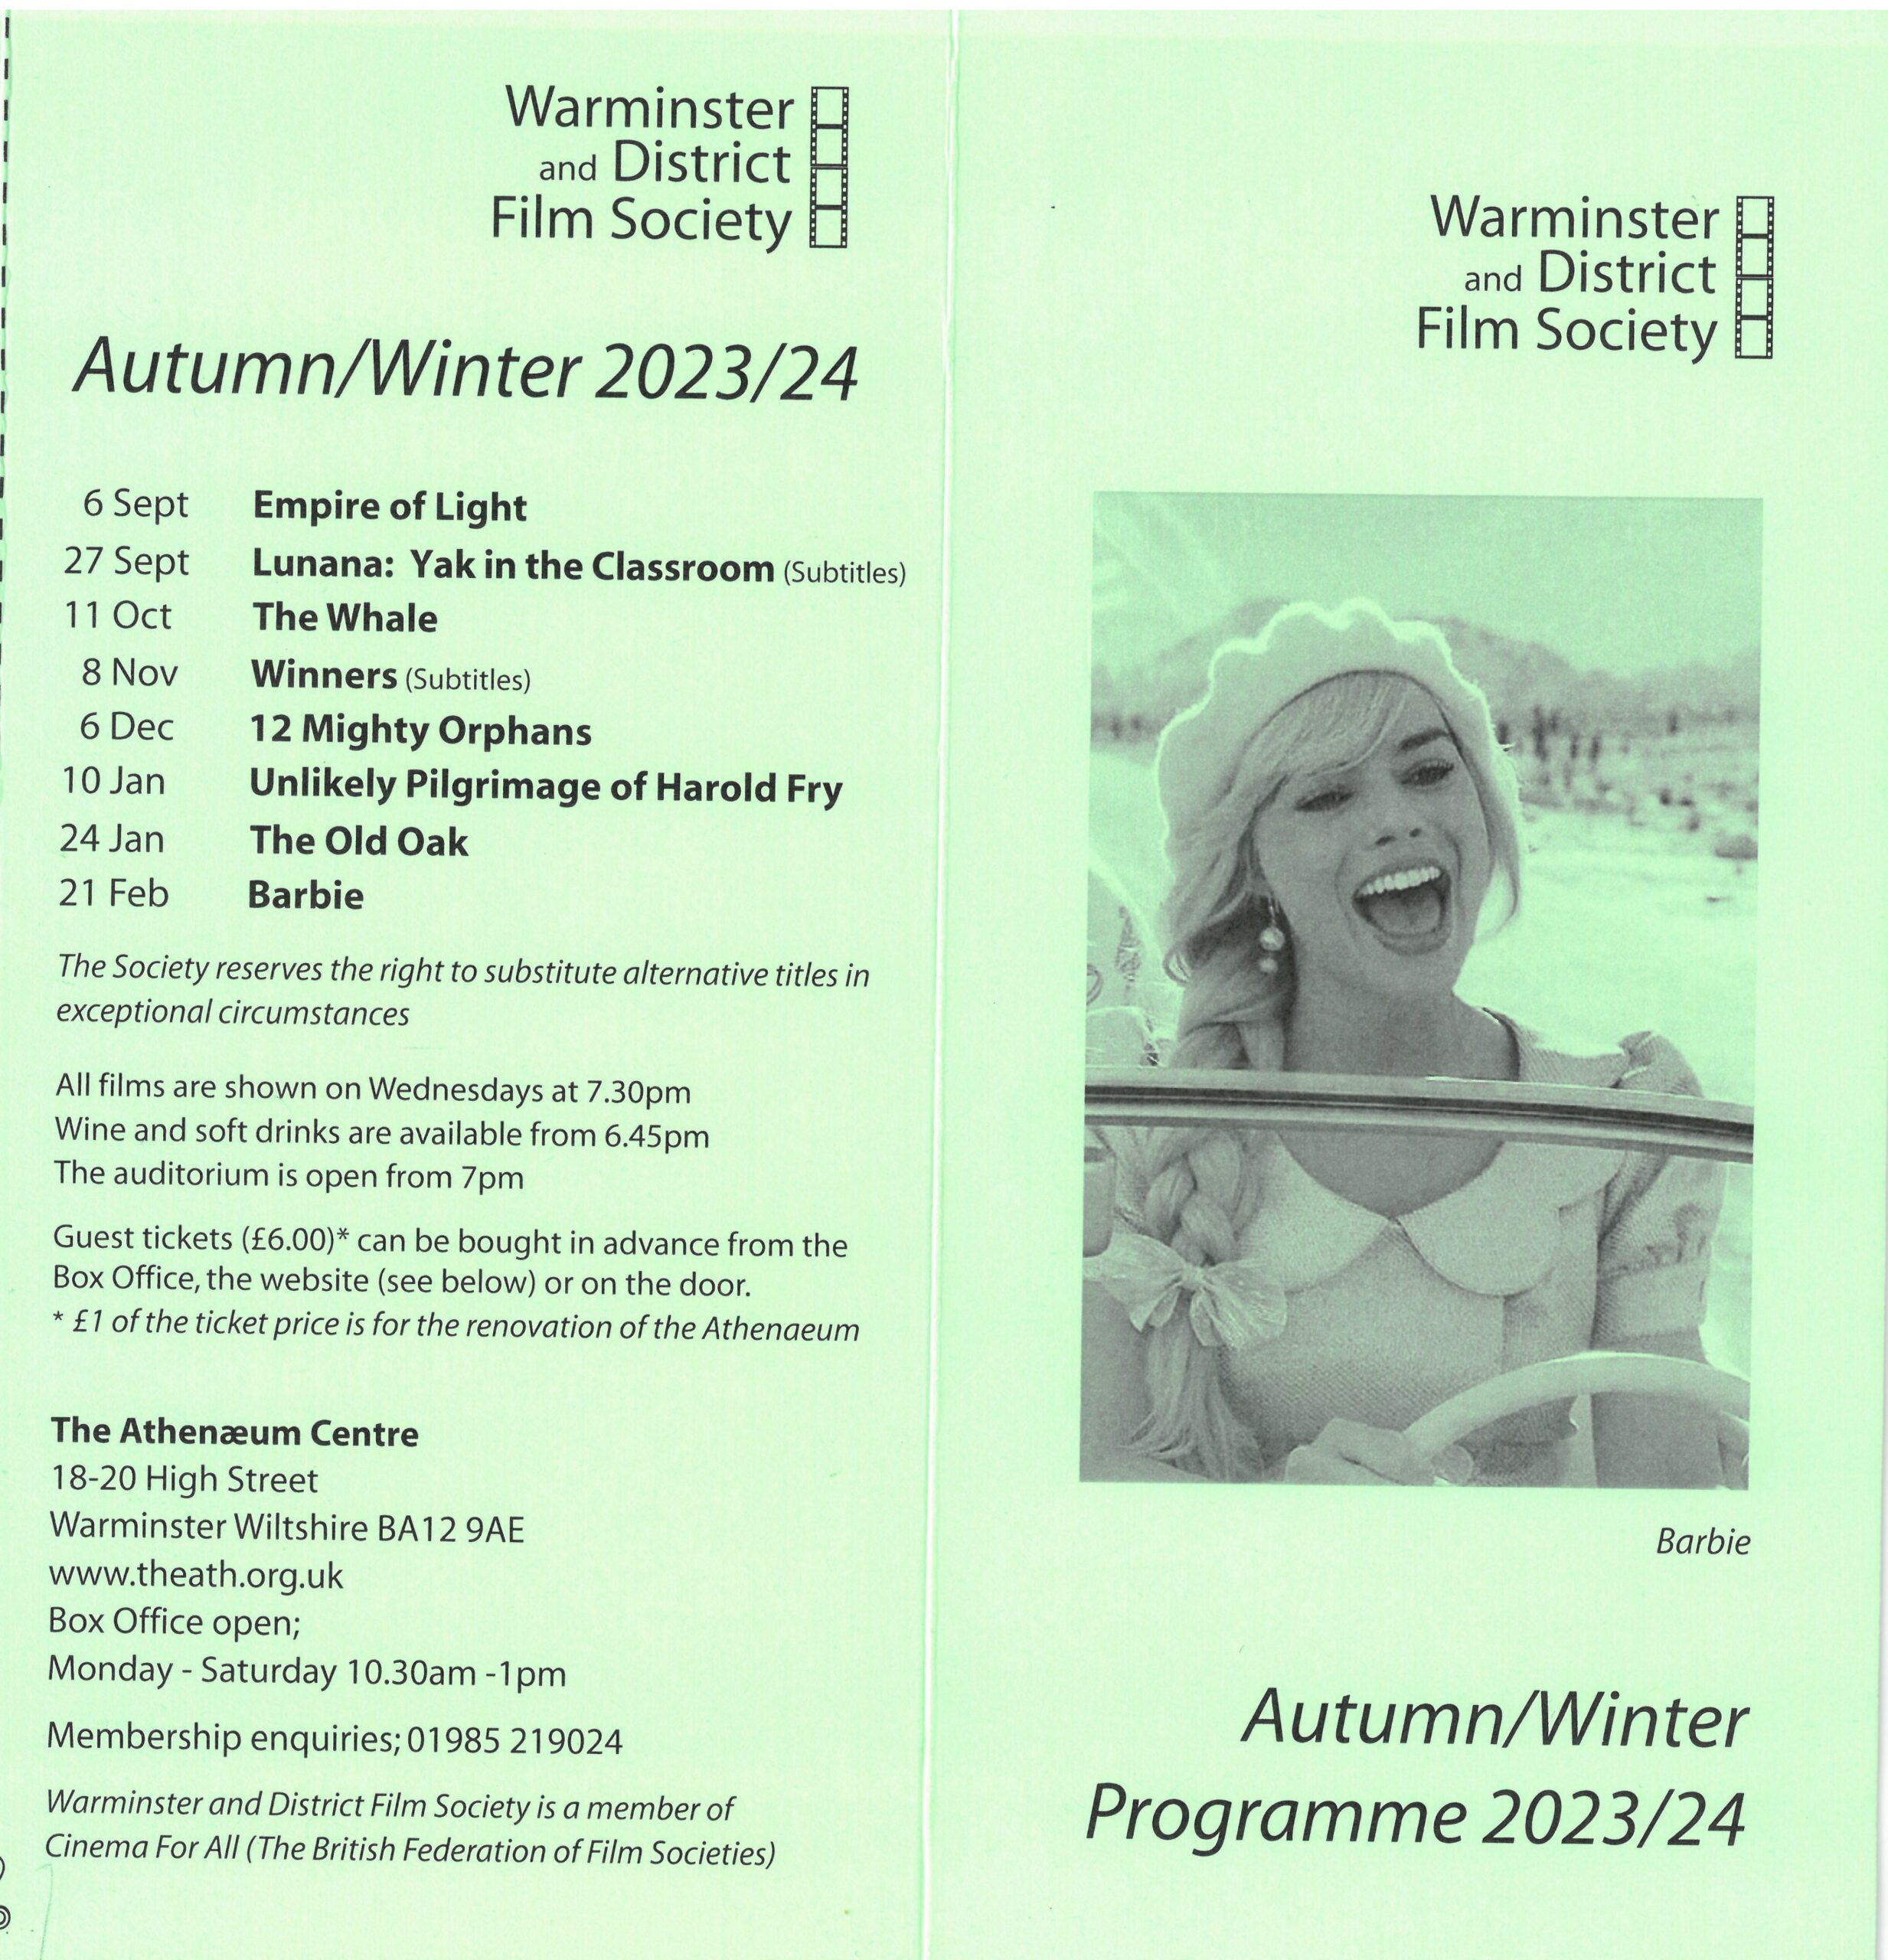 Warminster and District Film Society